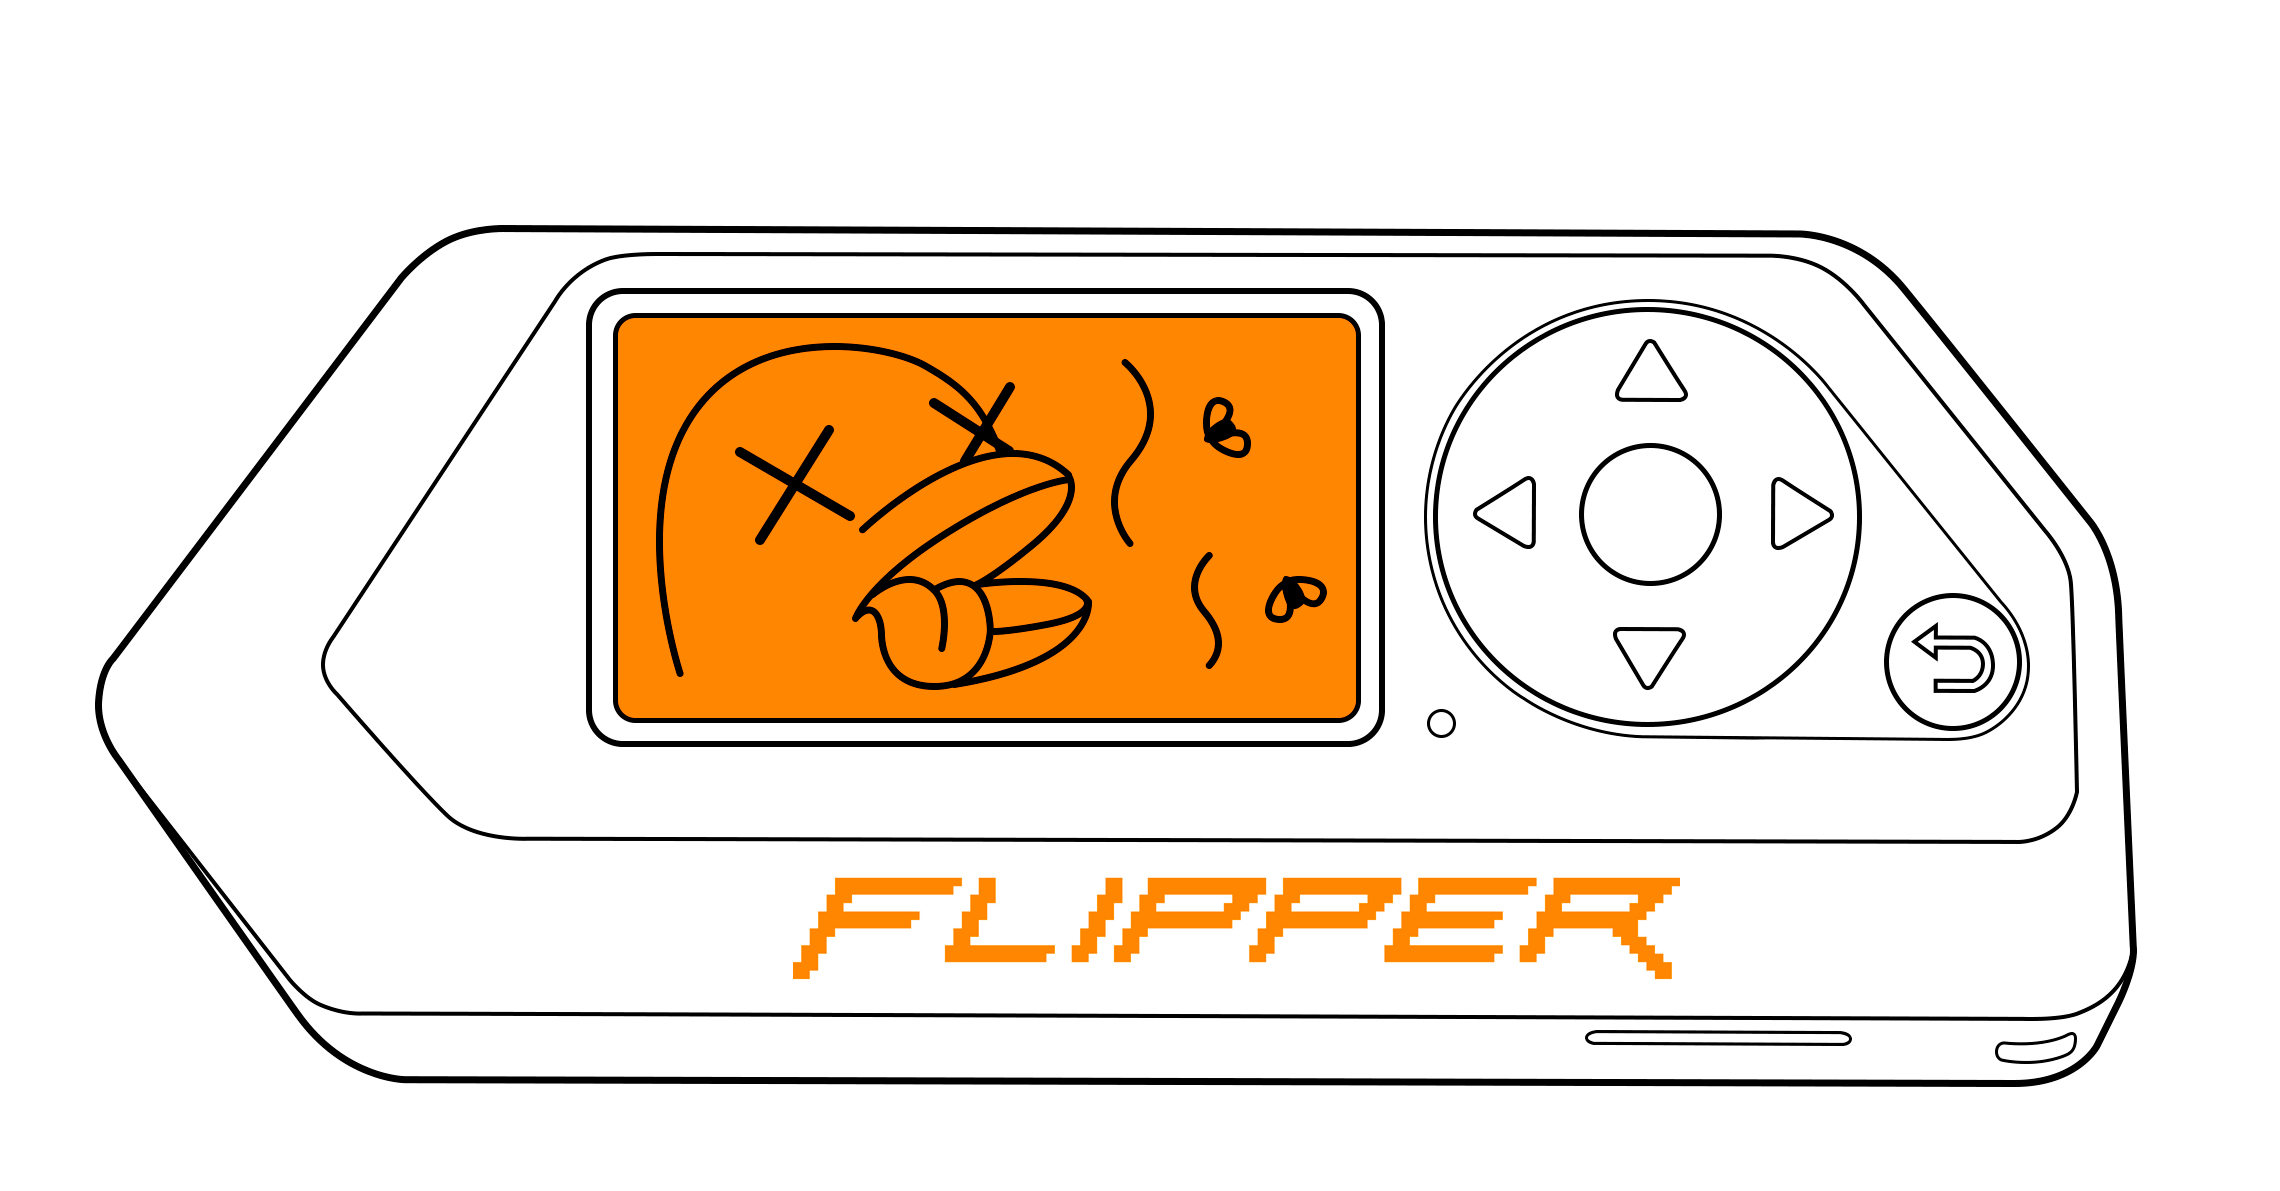 Flipper Zero: How to install third-party firmware (and why you